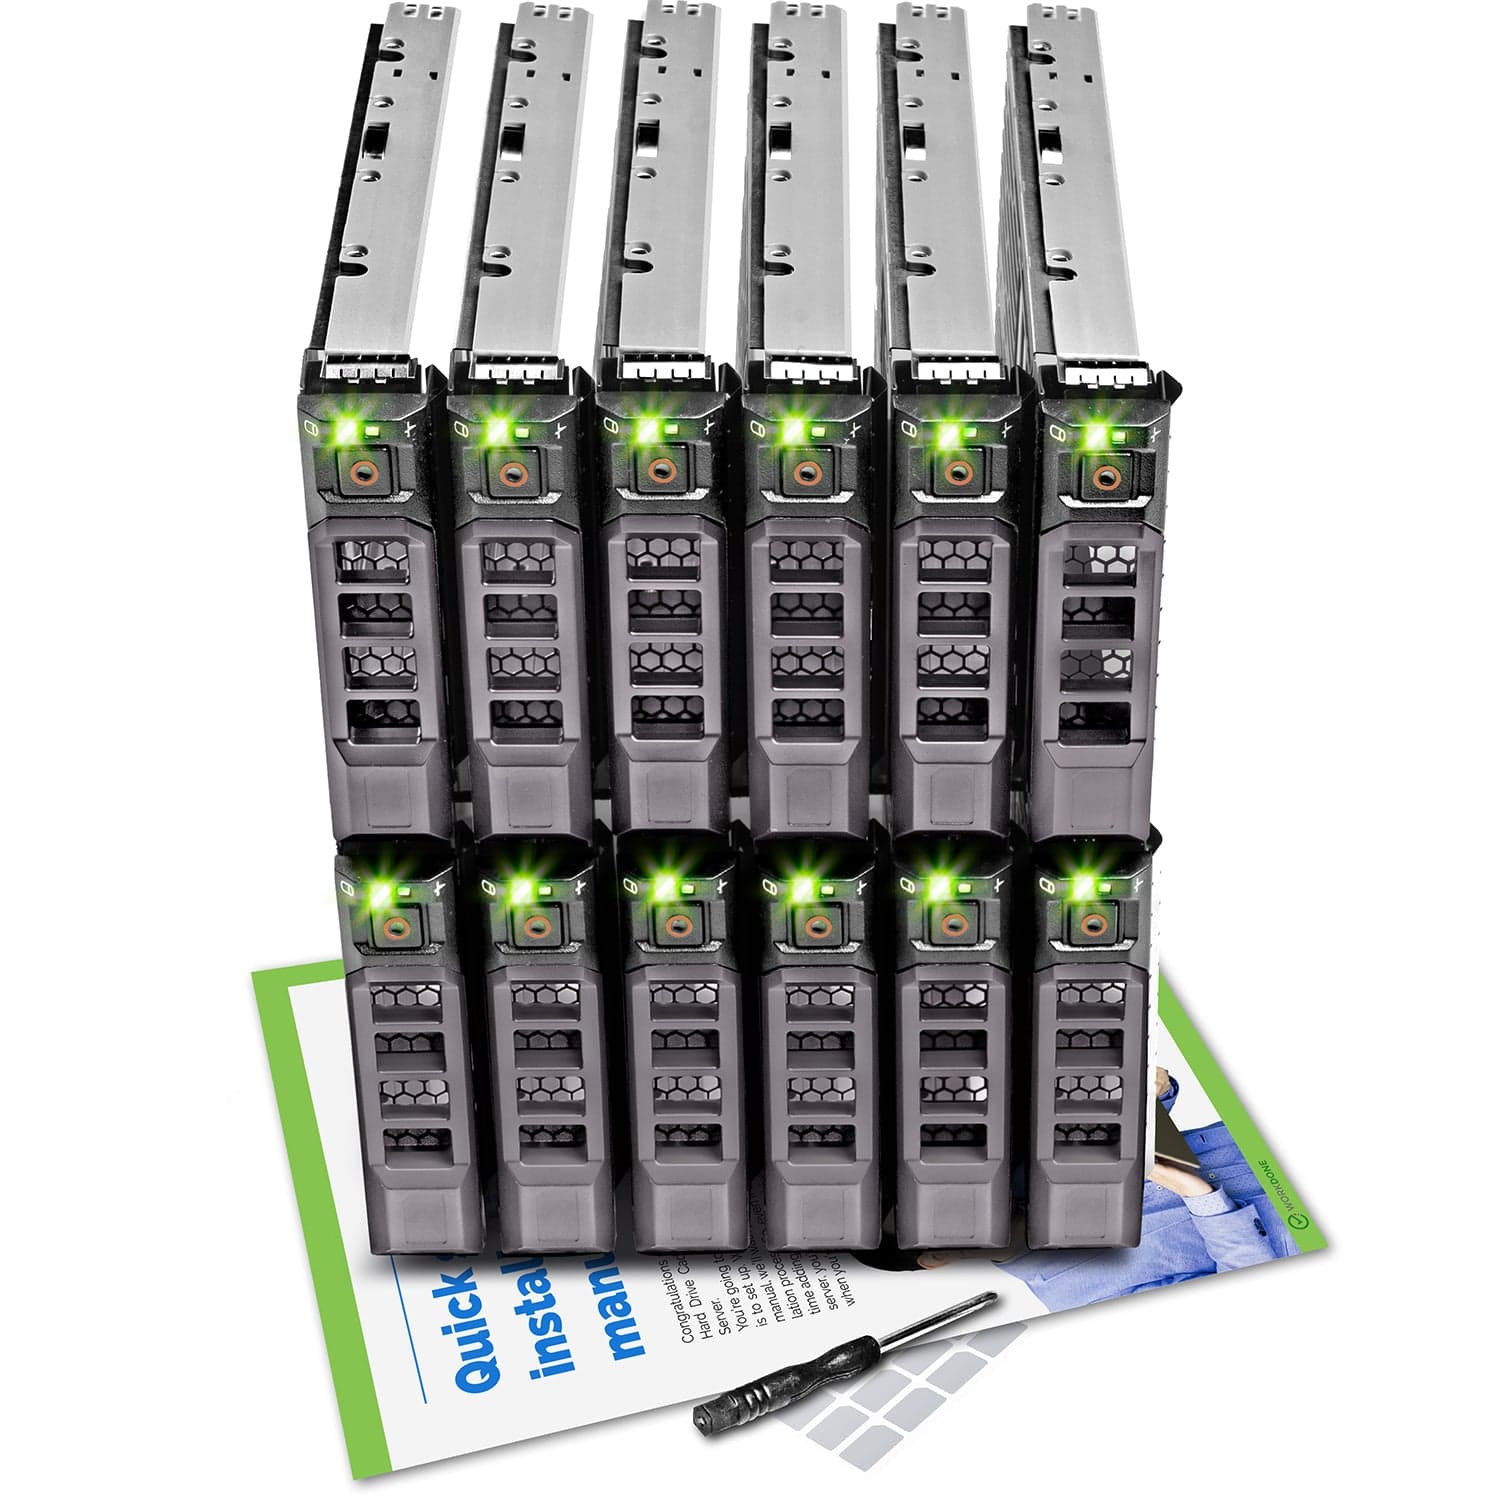 WORKDONE 12-Pack - 3.5" Hard Drive Caddy 0F238F - Compatible pour Dell PowerEdge  Selected 11-13th Gen Servers